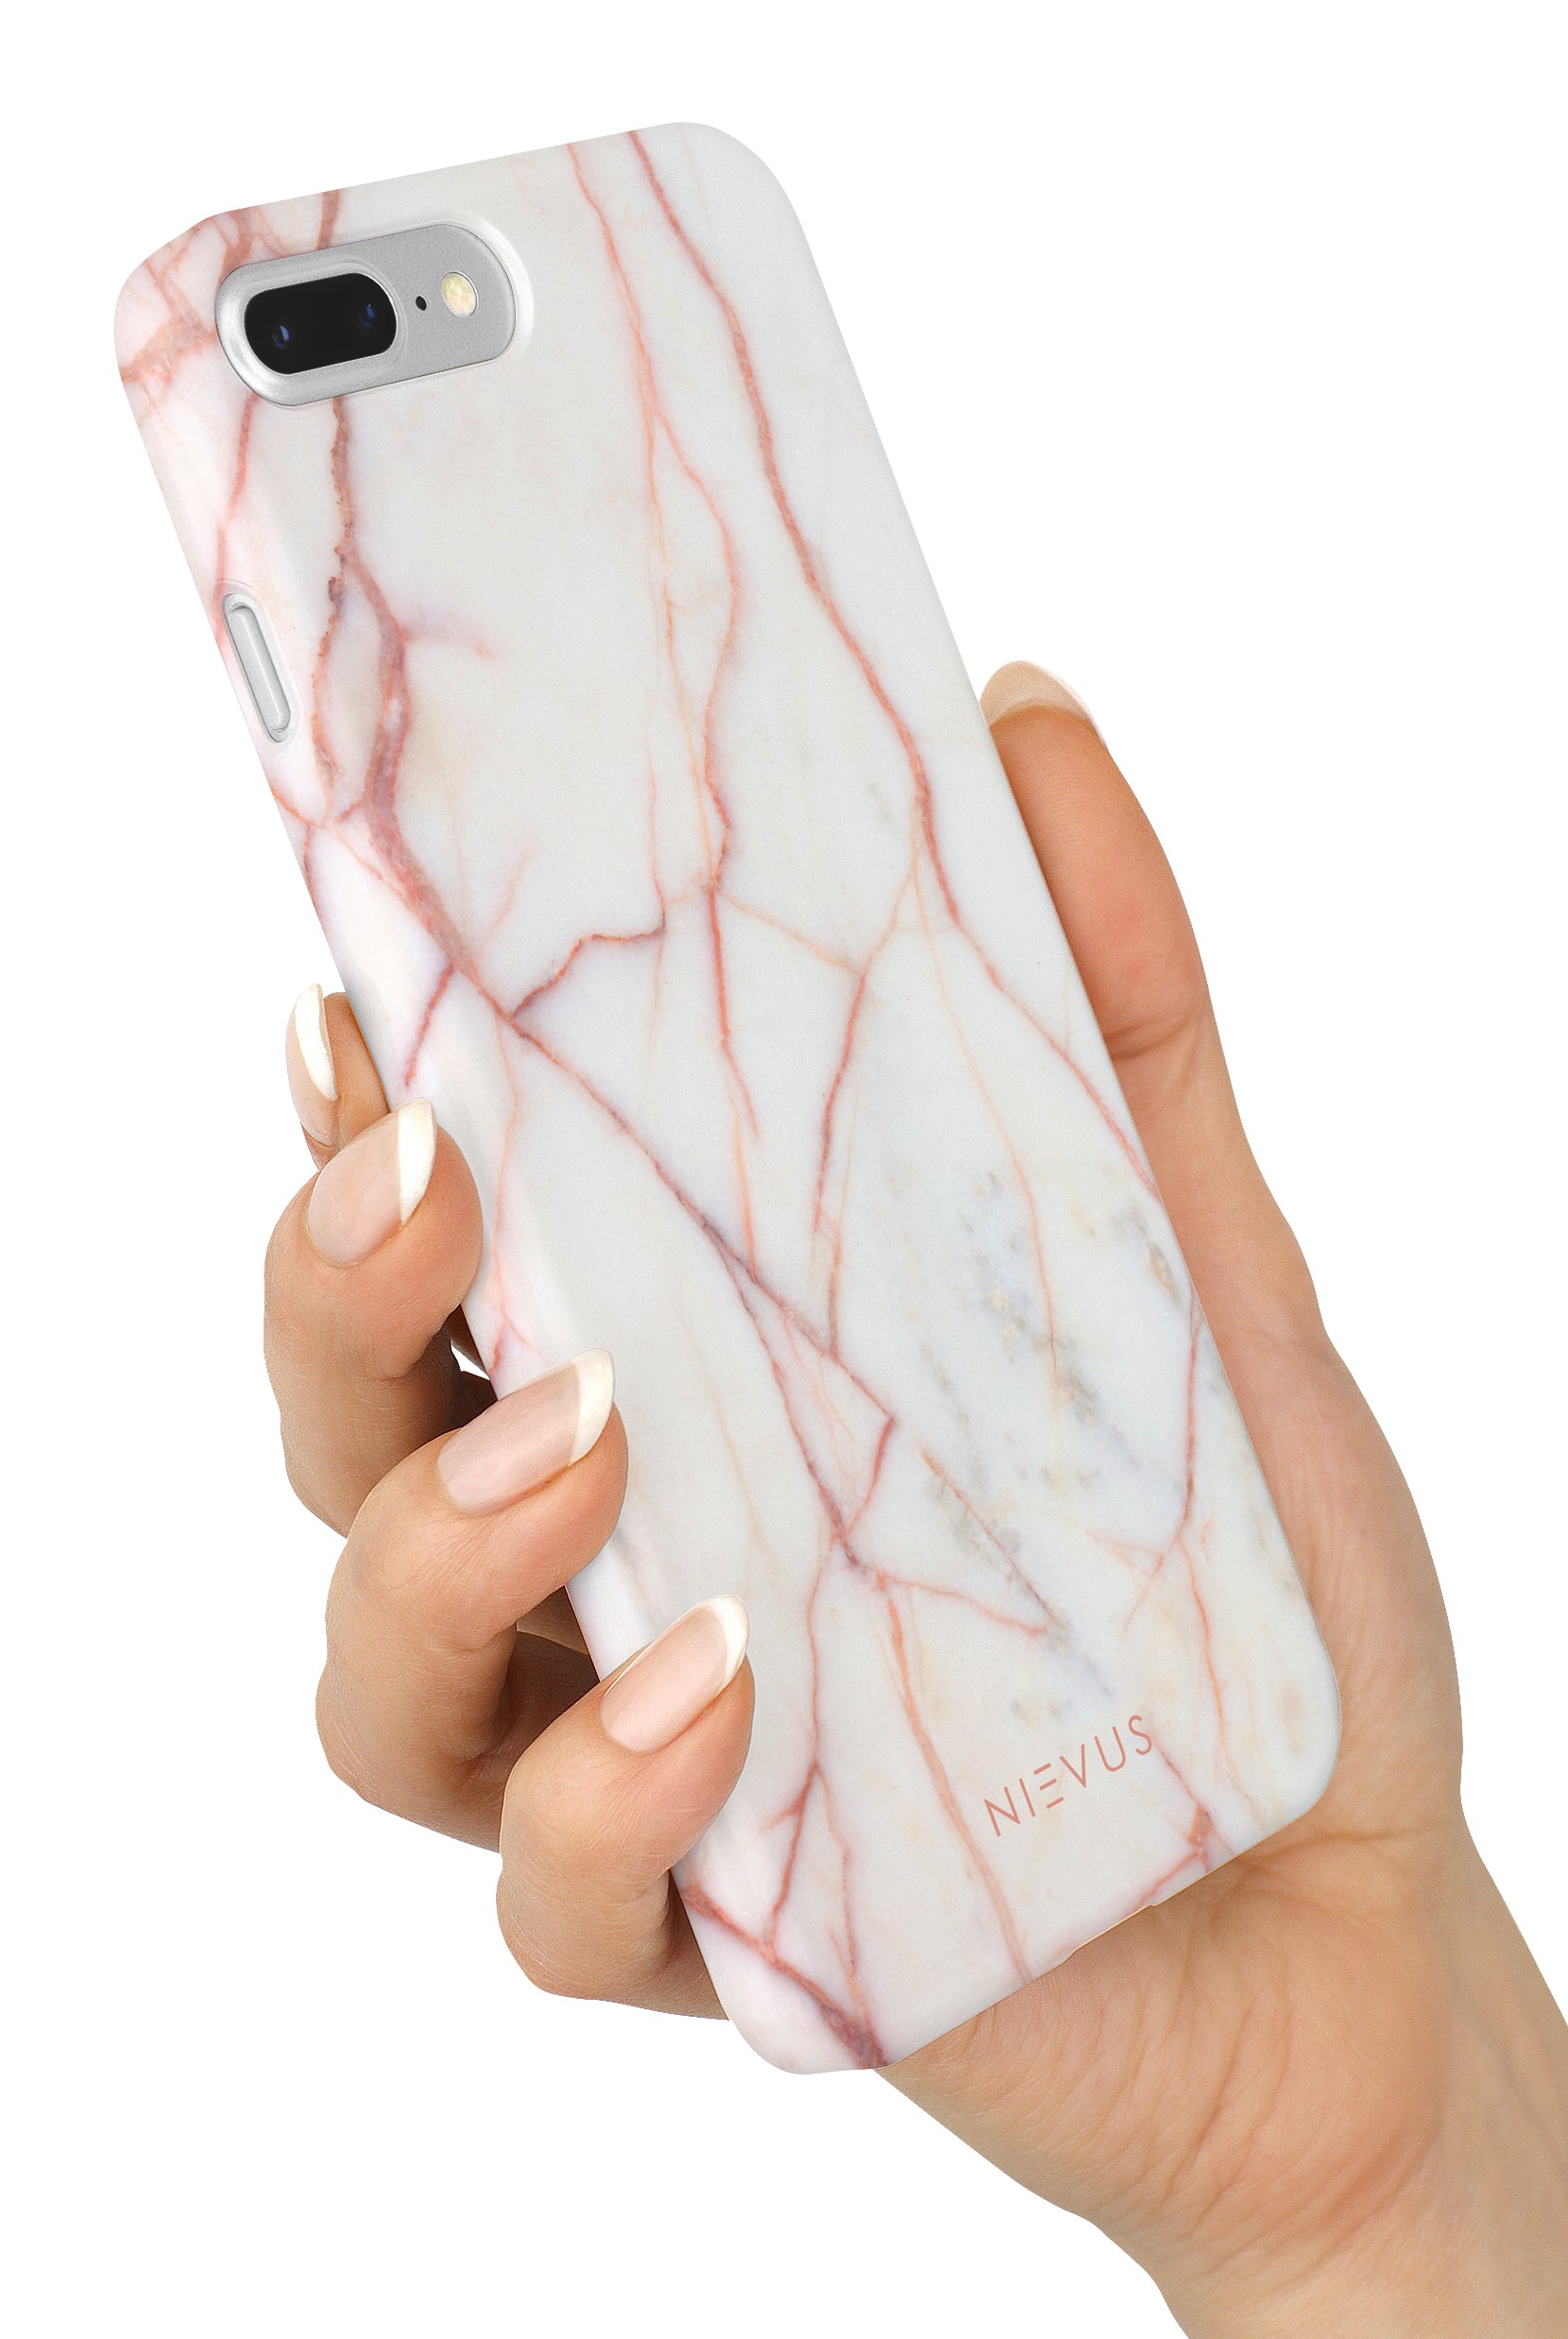 The Pink Marble Case